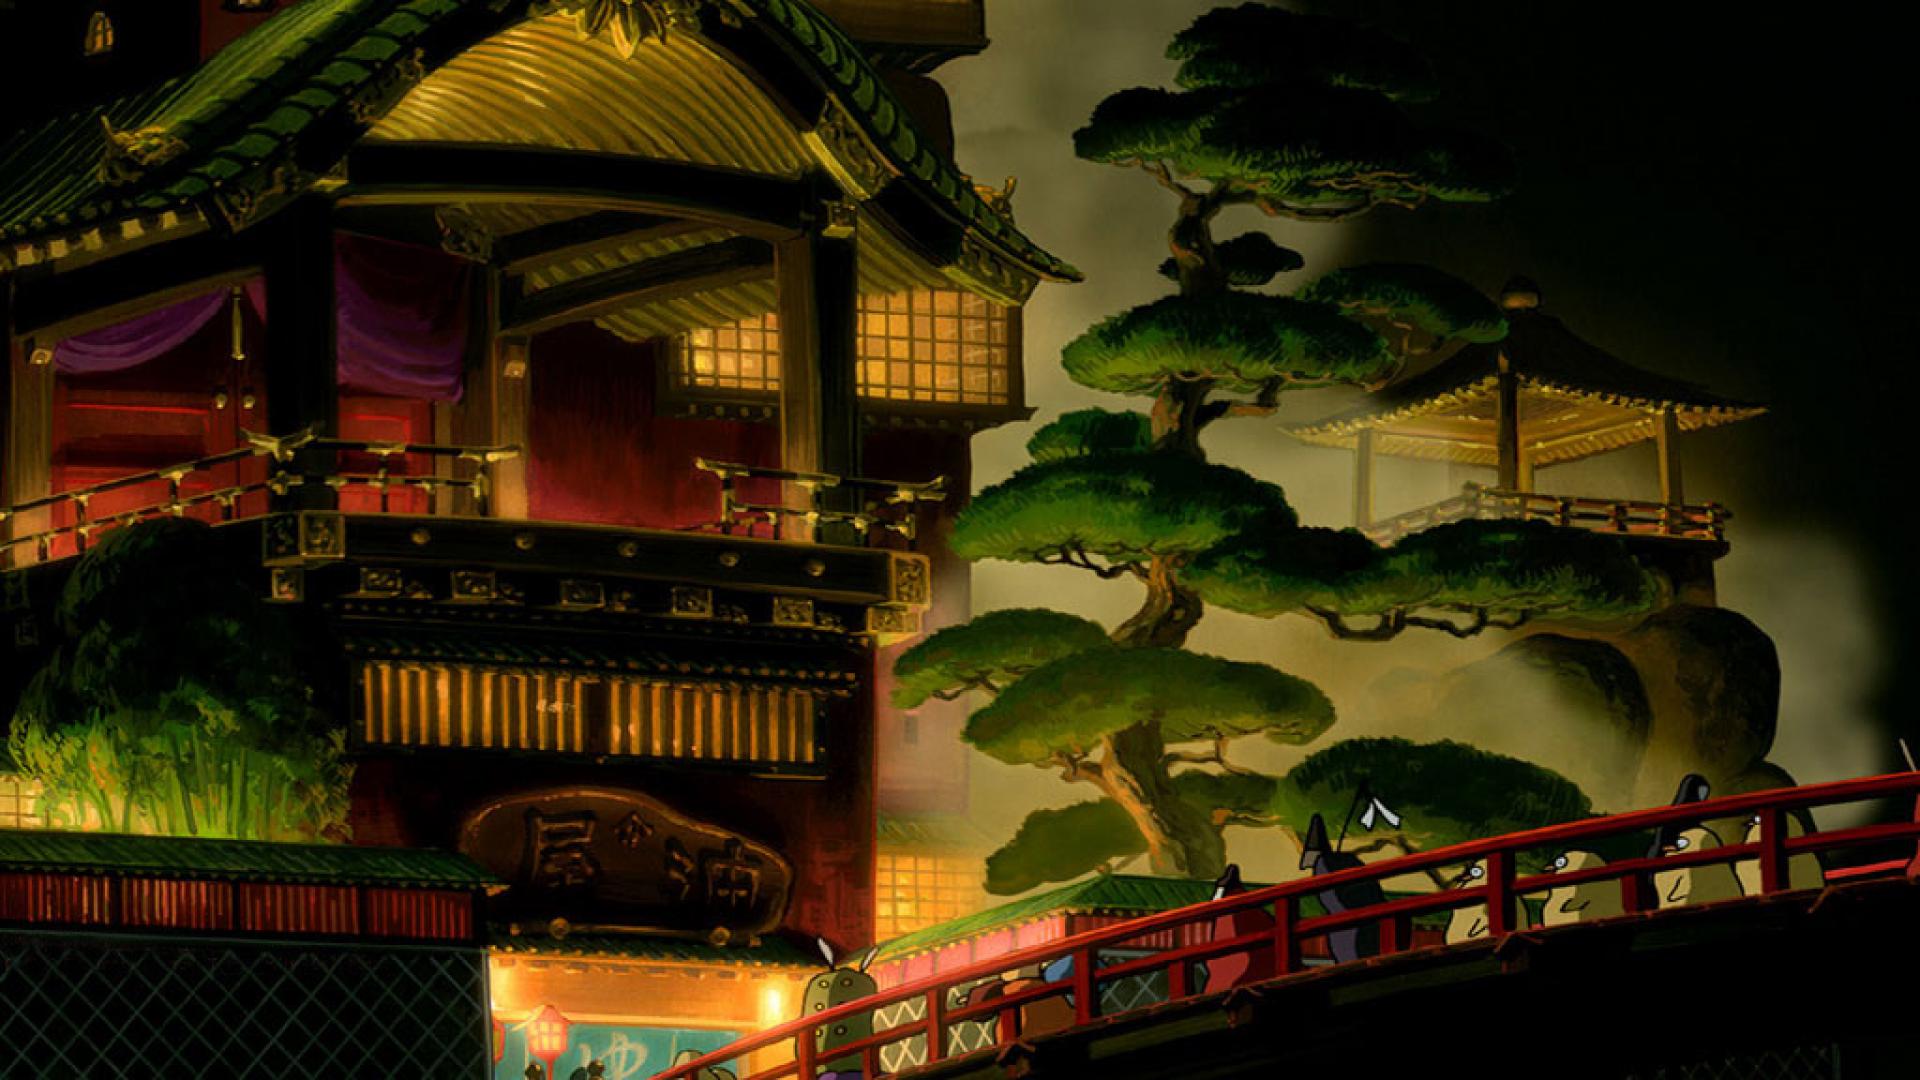 Spirited away wallpaper - - High Quality and Resolution